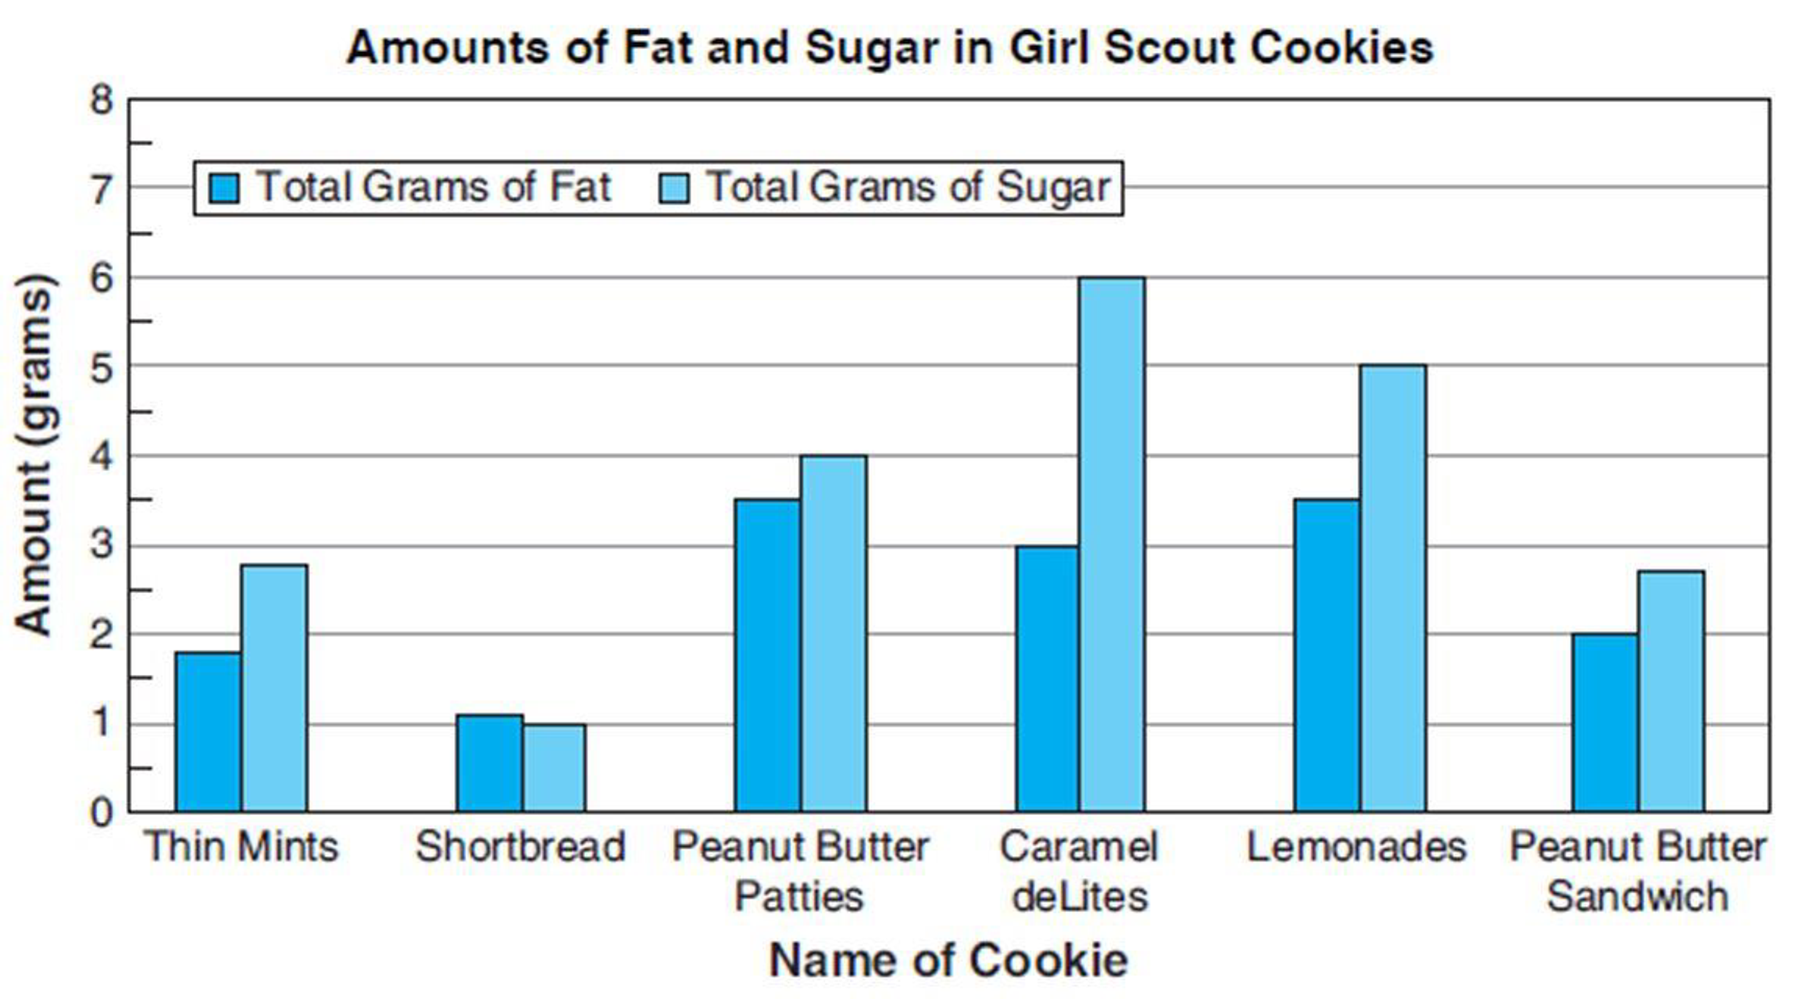 Chapter 12, Problem 14APS, By what percent does the amount of fat in a Lemonade exceed the amount of fat in a Thin Mint? 